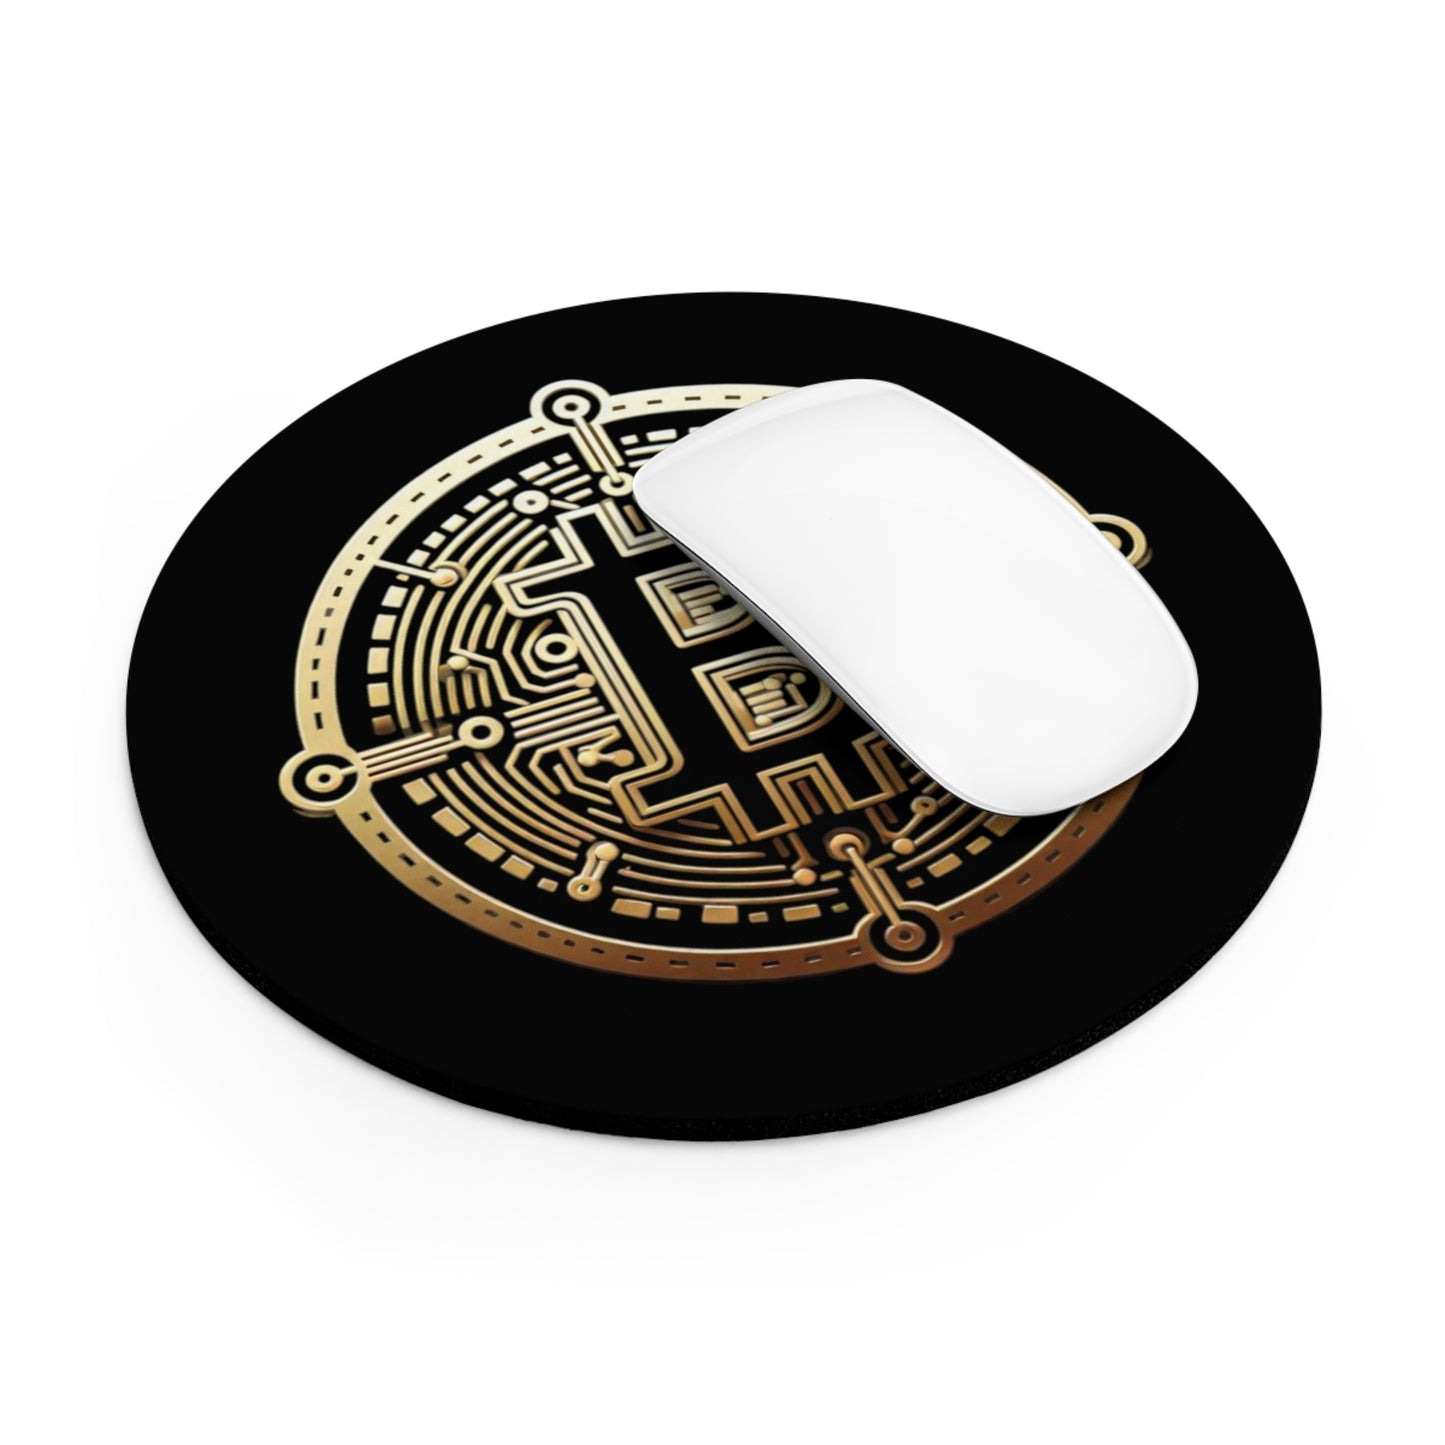 Bit by Bit Crypto - Mouse Pad